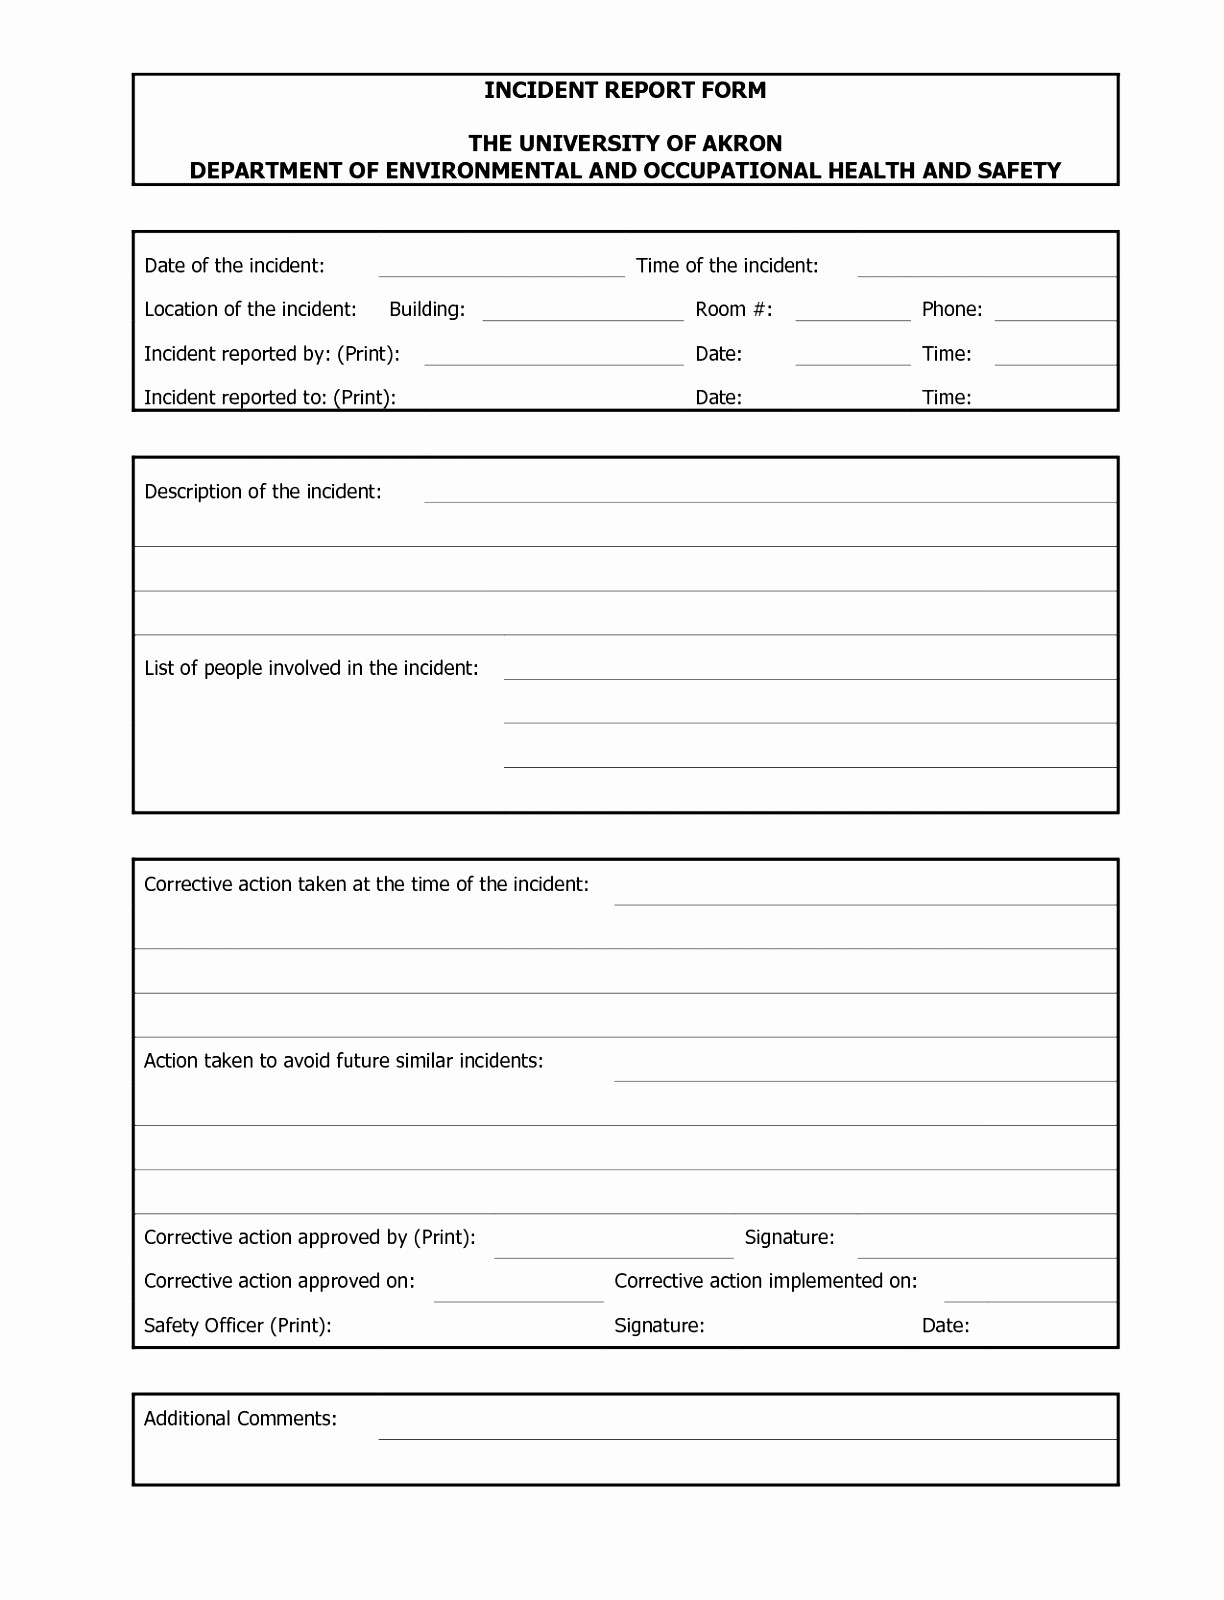 Automobile Accident Report Form Template Elegant Incident Inside Vehicle Accident Report Form Template